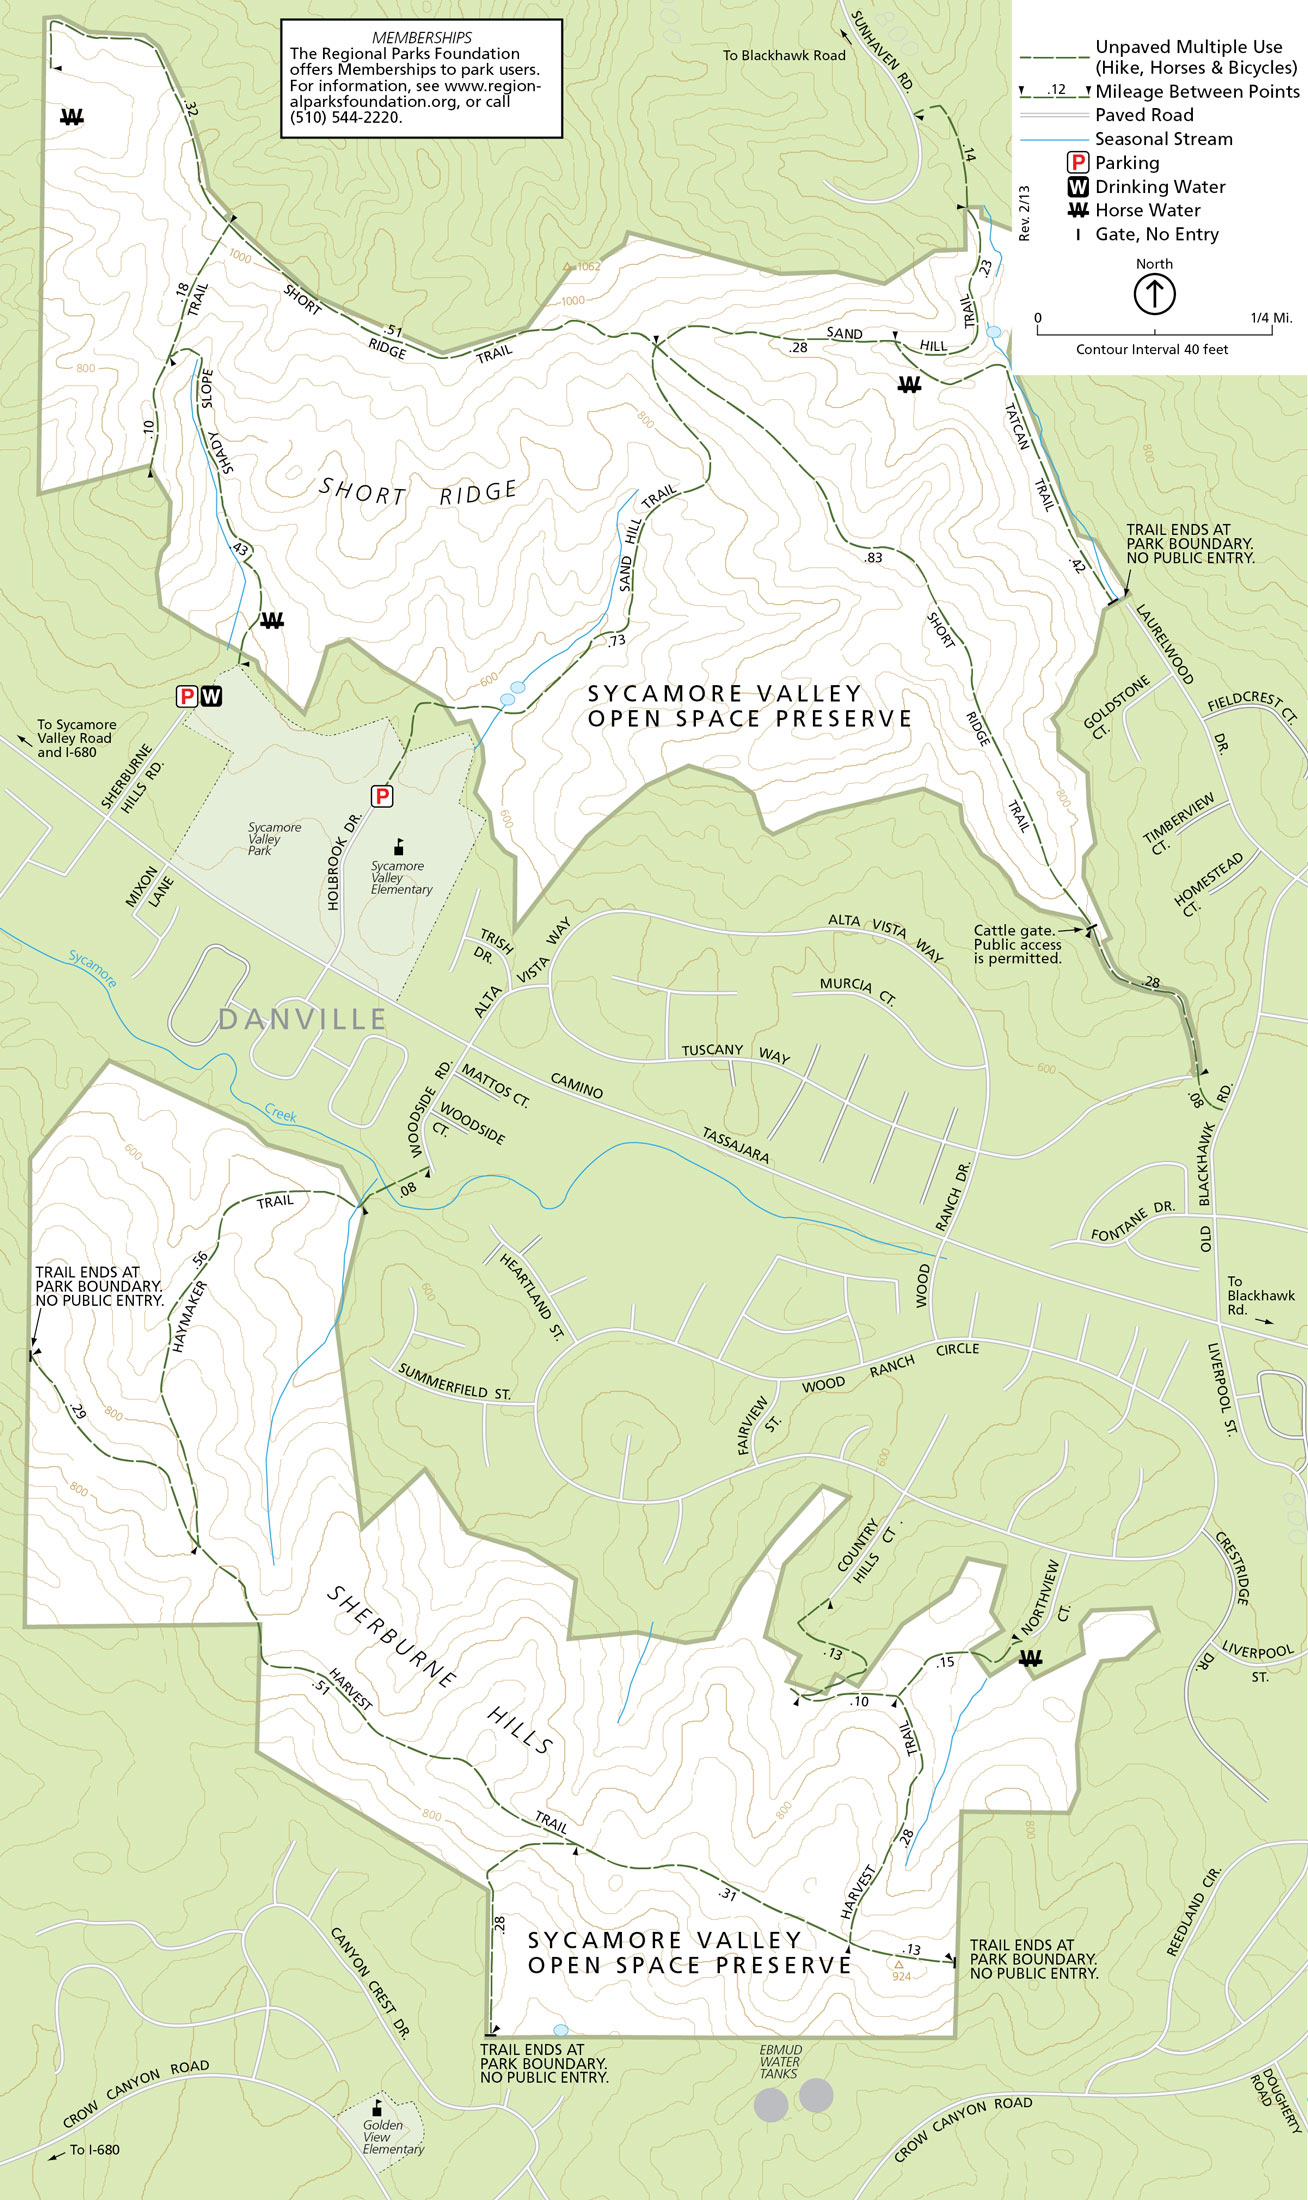 Map of Sycamore Valley Open Space Preserve